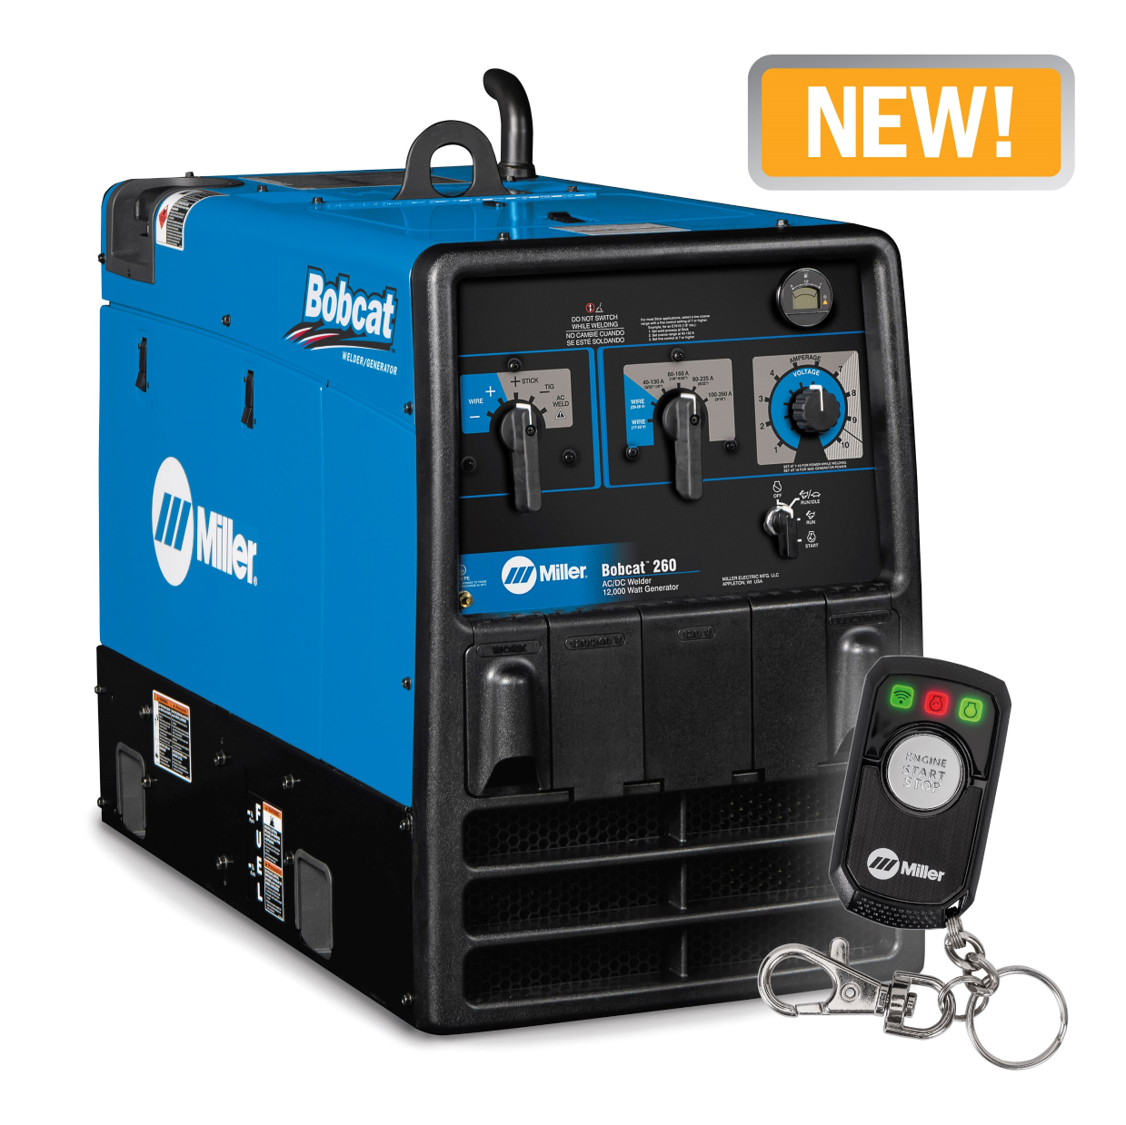 Bobcat™ 260 with Remote Start/Stop and Electric Fuel Pump